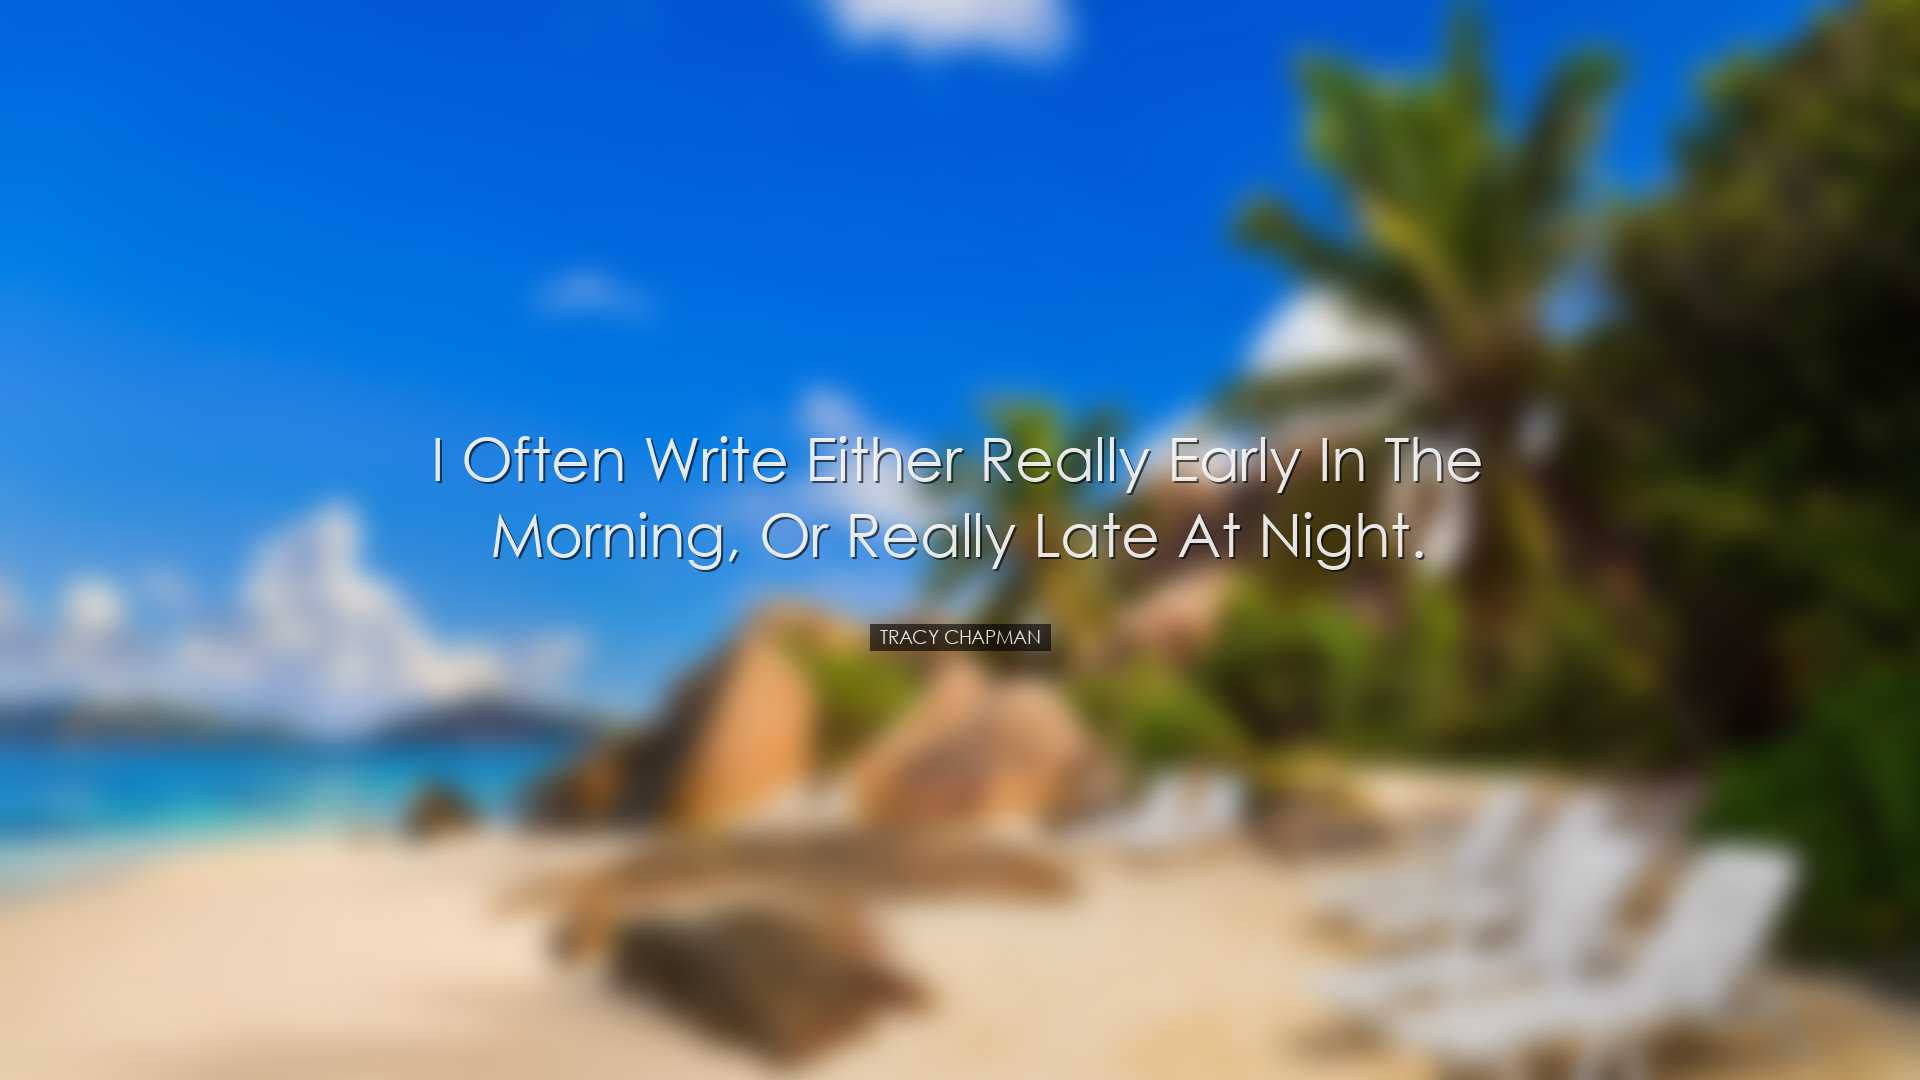 I often write either really early in the morning, or really late a